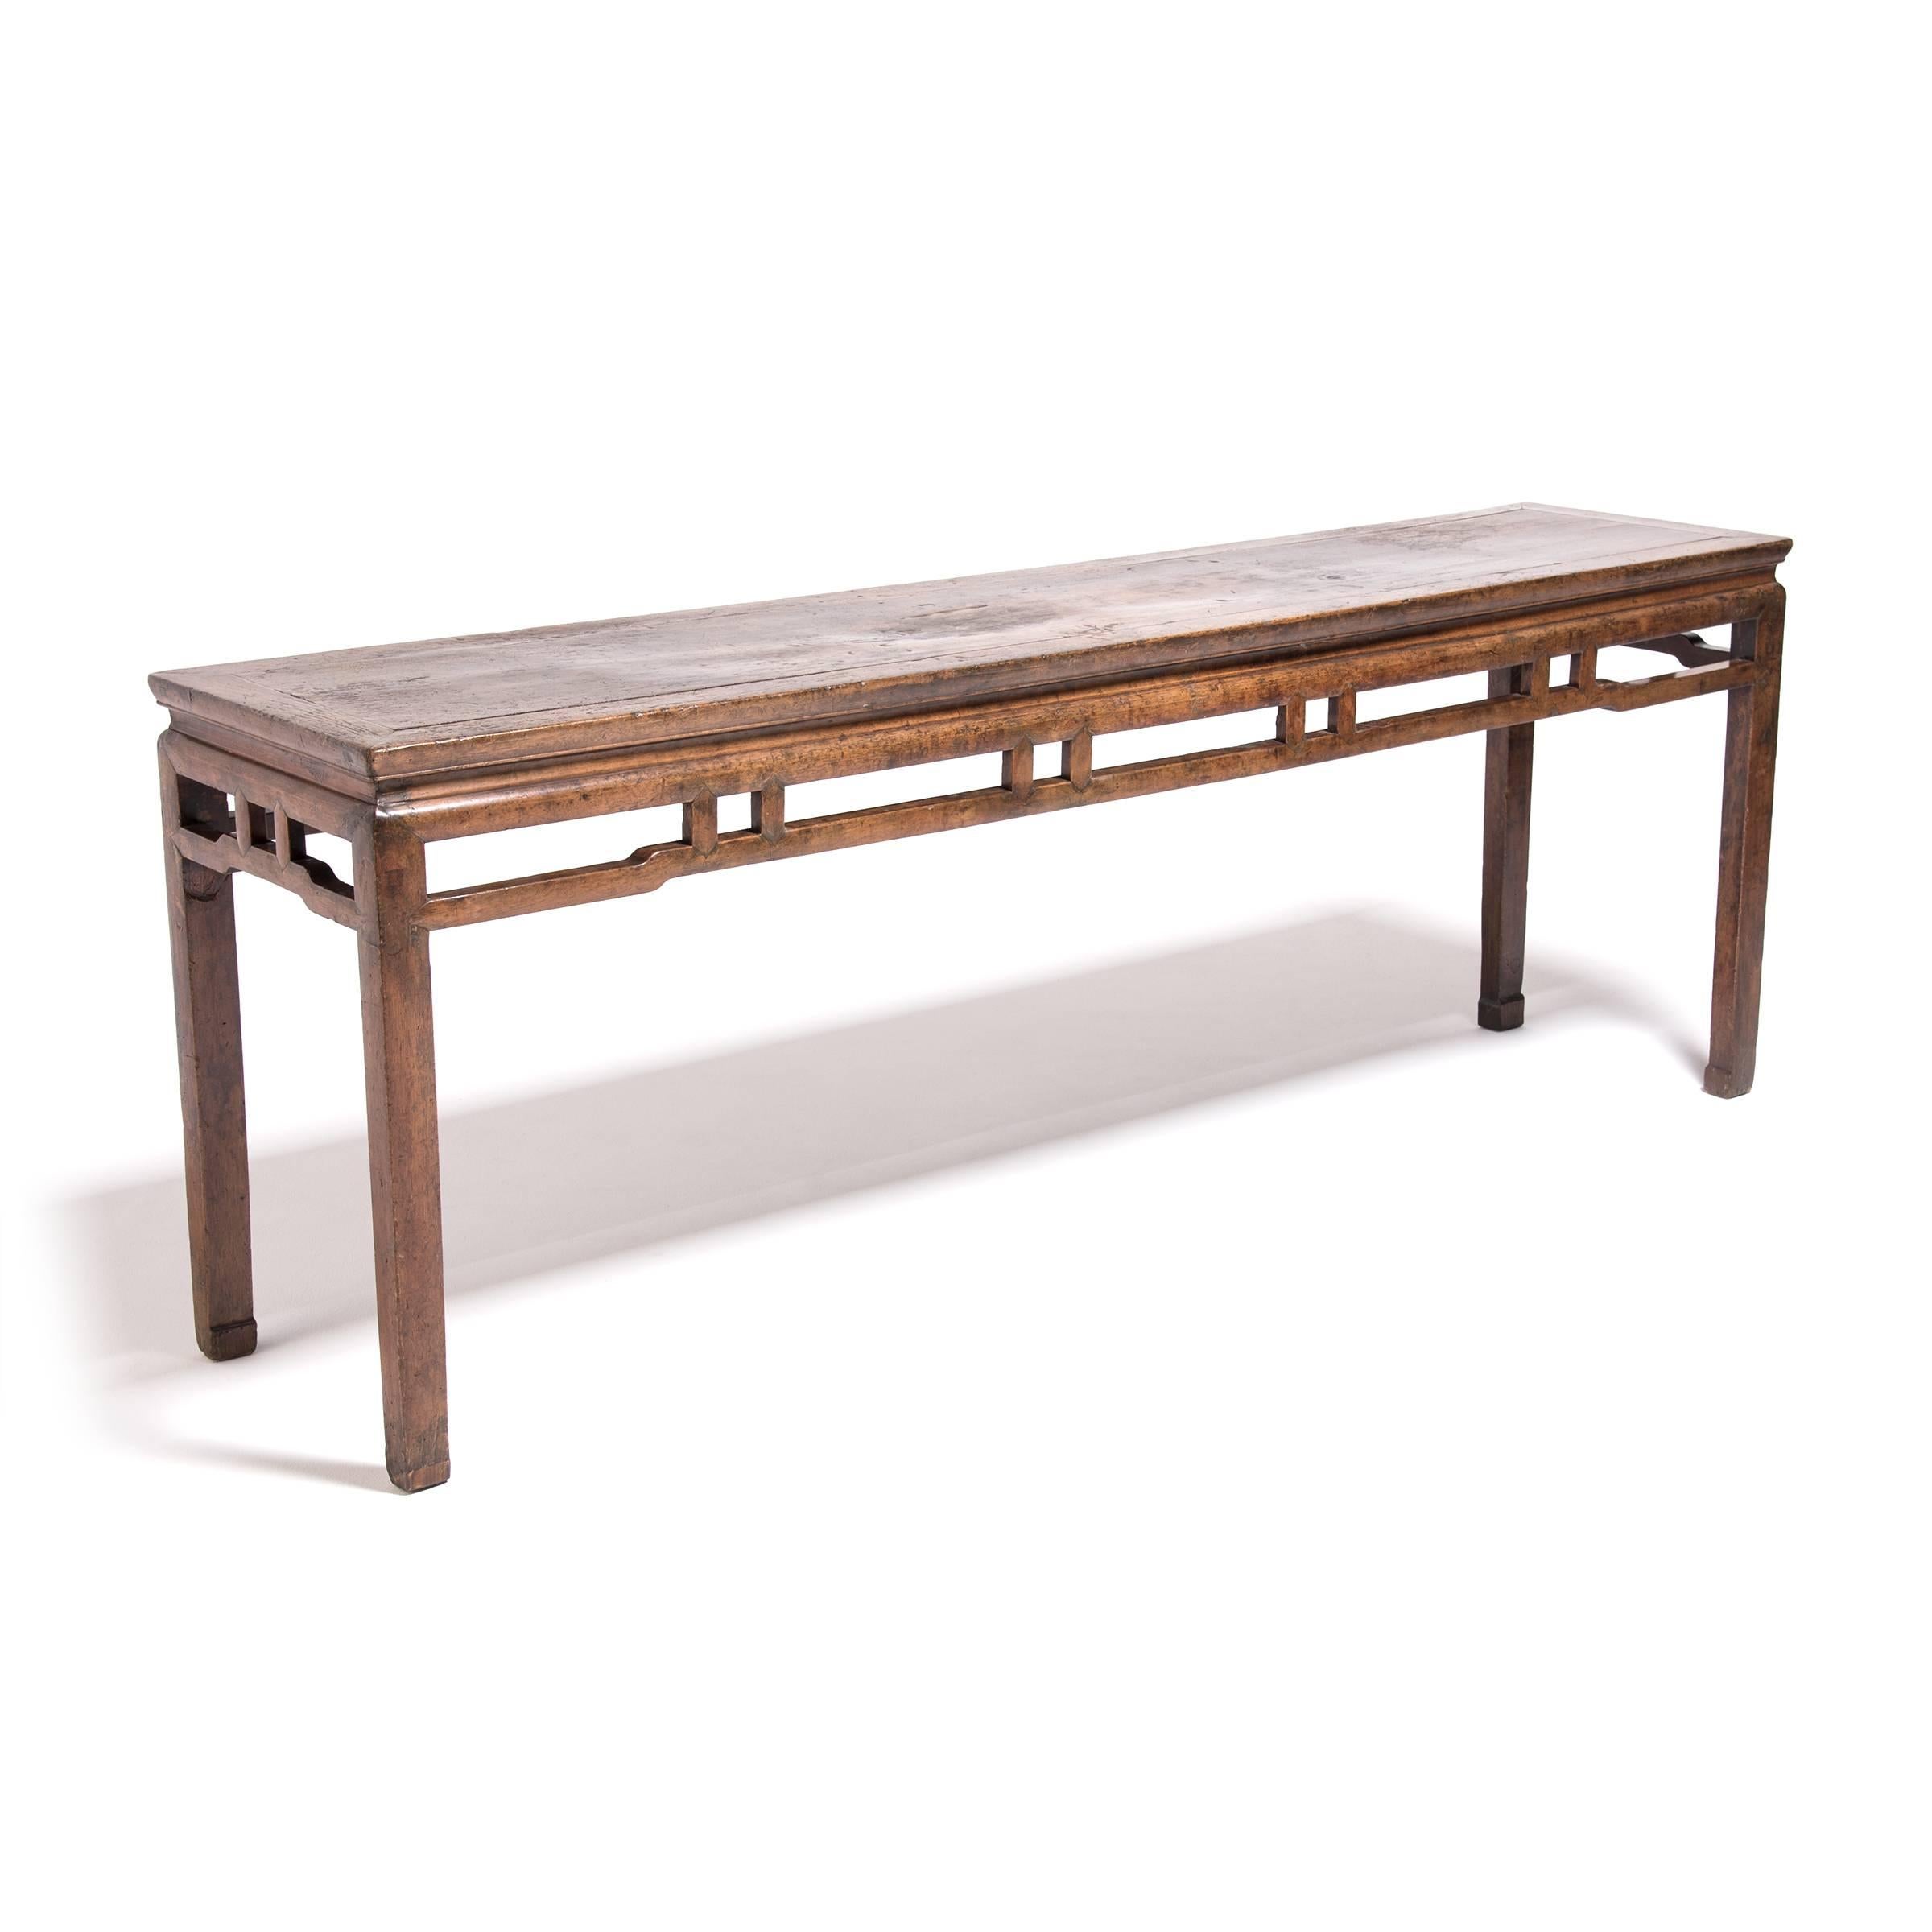 Readily available and durable, the northern elmwood used to make this 19th-century altar table has an even grain and color that enabled artisans to employ sophisticated joinery, piecing the table together without benefit of glue or nails. This